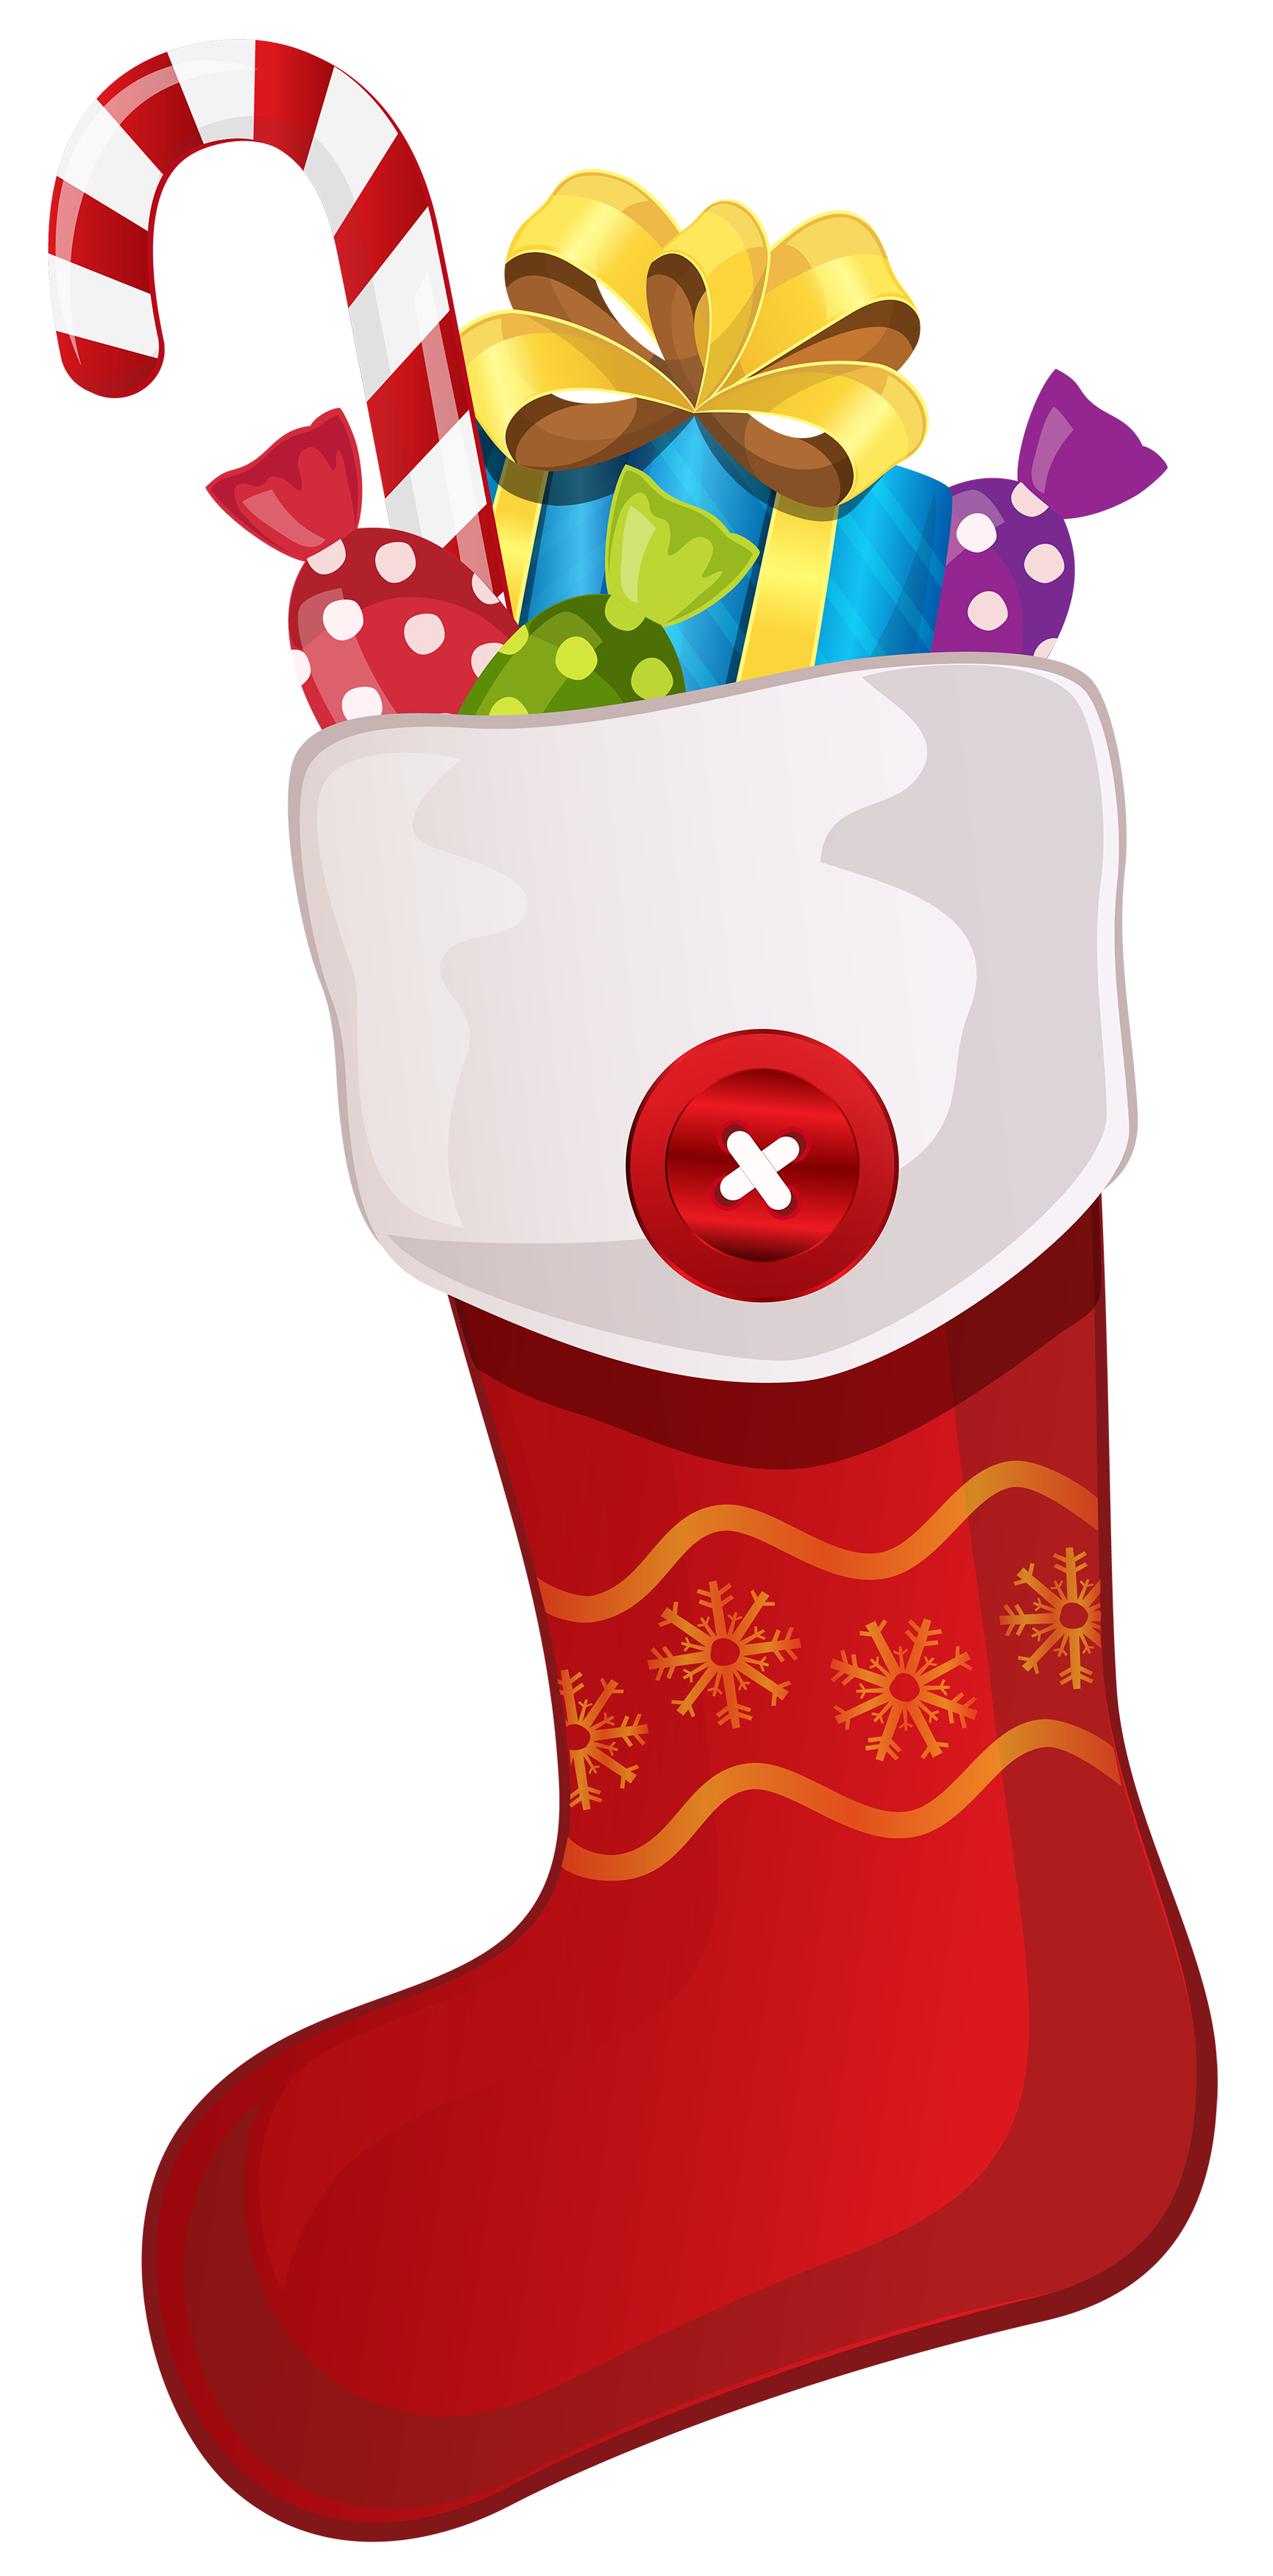 Hearts clipart christmas. Red stocking with candy